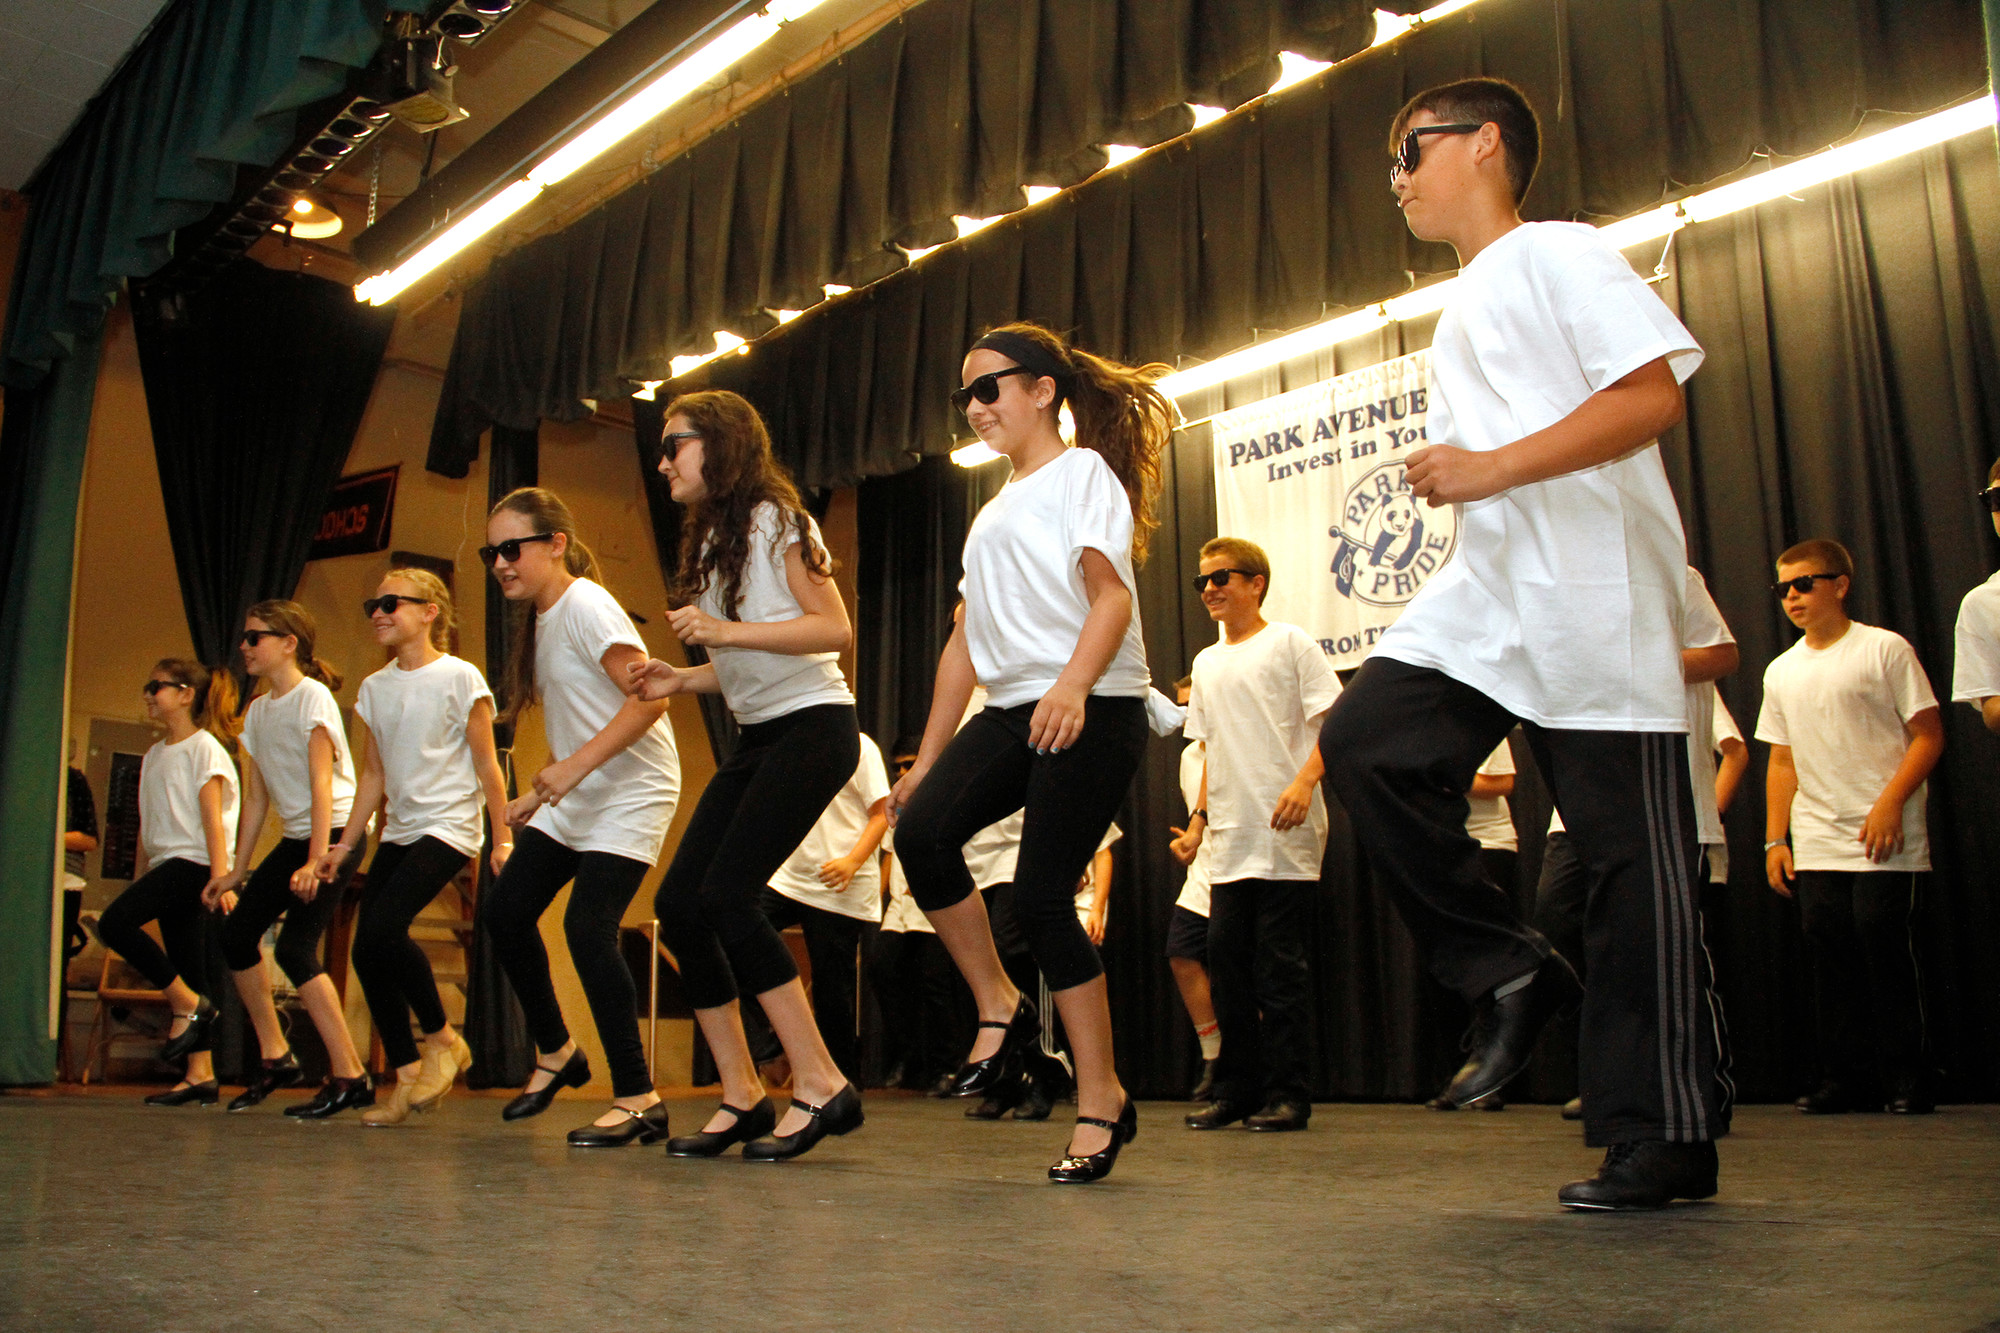 Robin Hennessy's class danced to a James Brown classic at the recital on May 15.